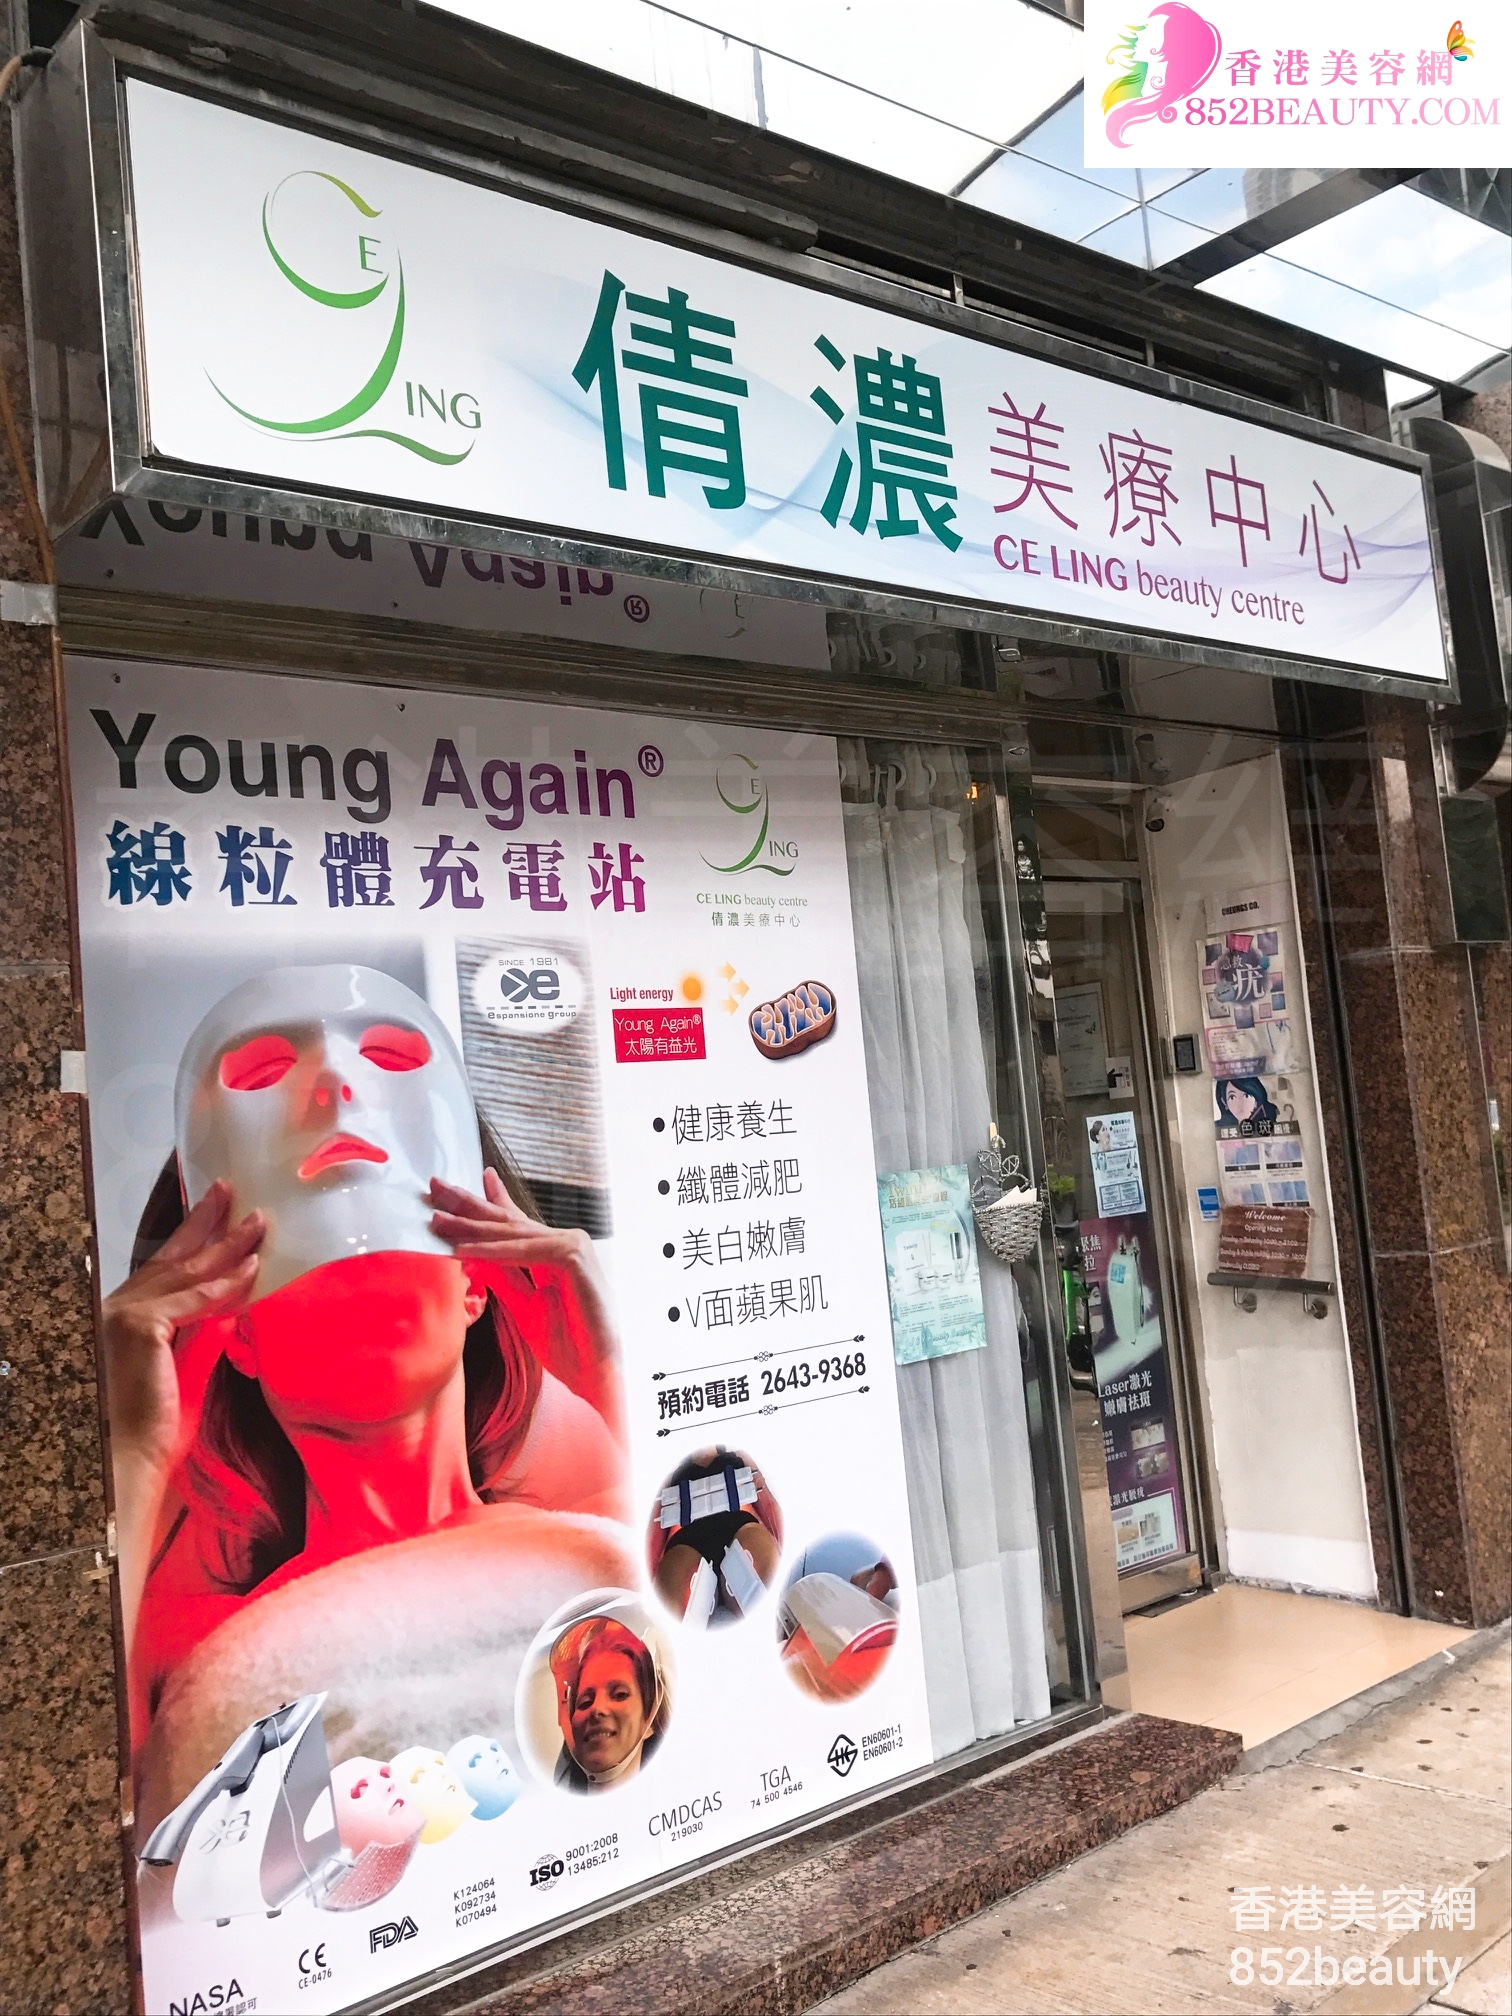 Hair Removal: 倩濃美療中心 CE LING Beauty Centre